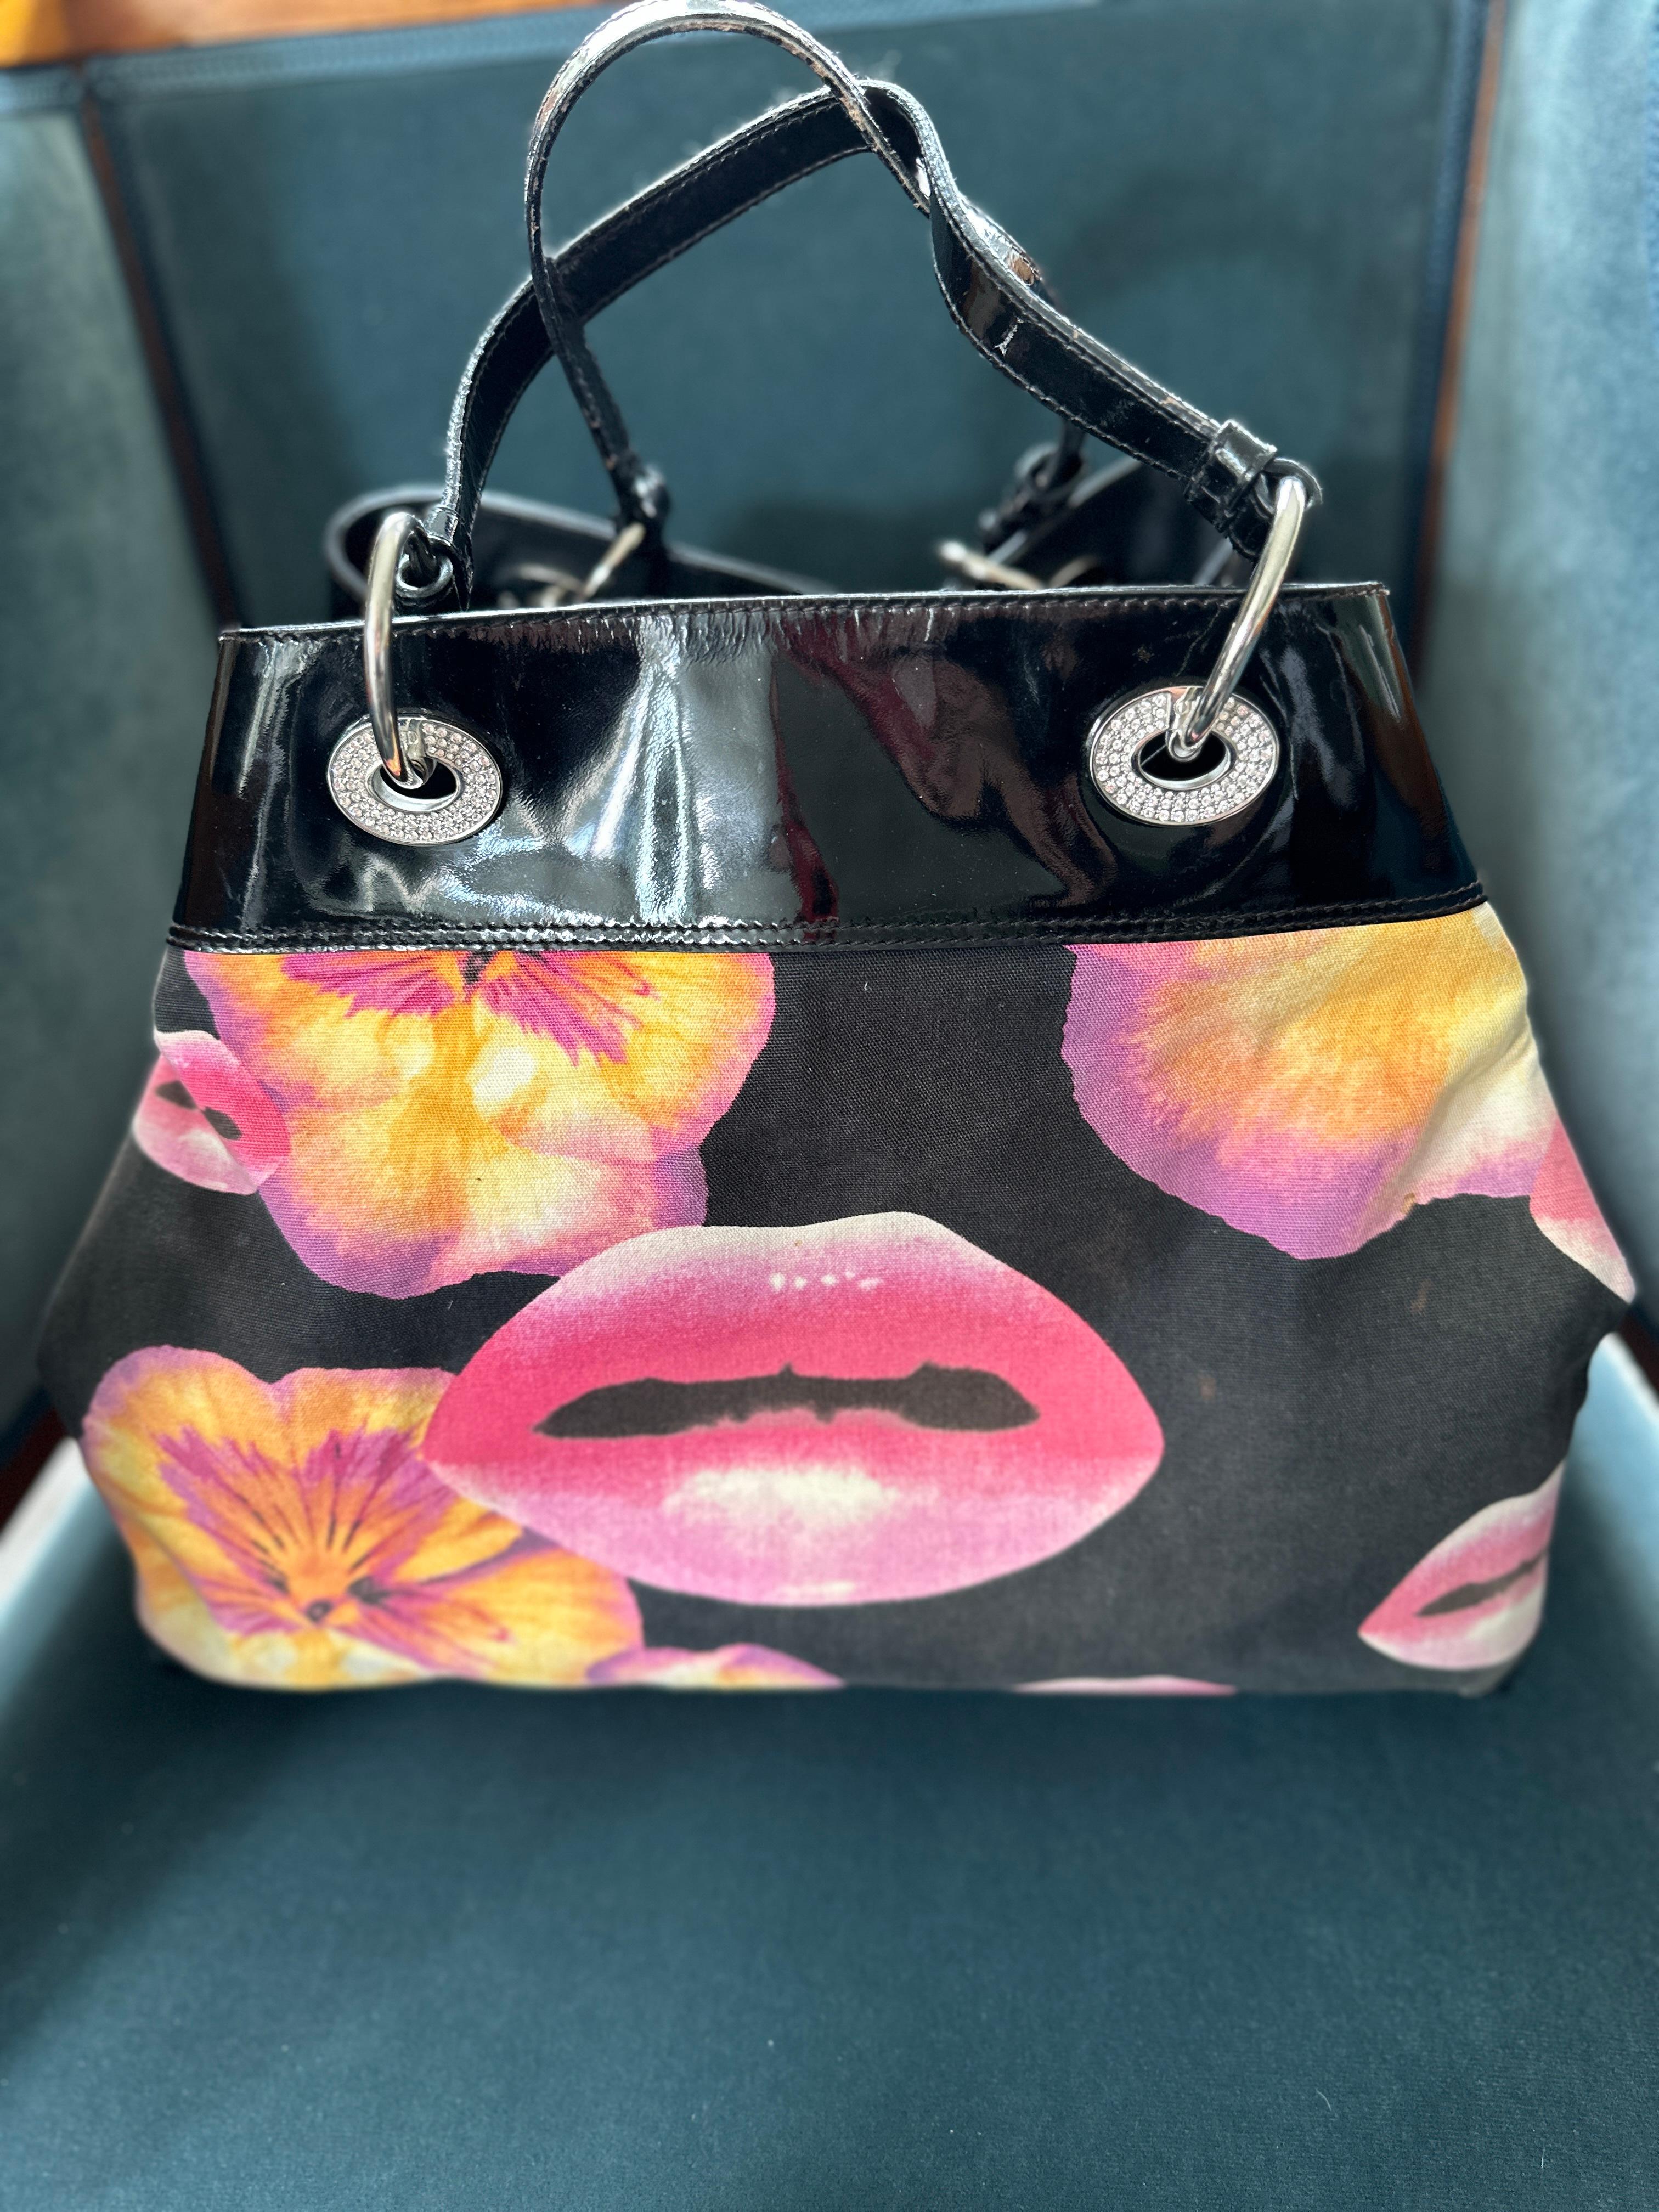 Christian Dior Spring 2005 Surreal Lips and Pansy Print Bag by John Galliano
Excellent pre owned condition, the patent leather shows minor wear
13